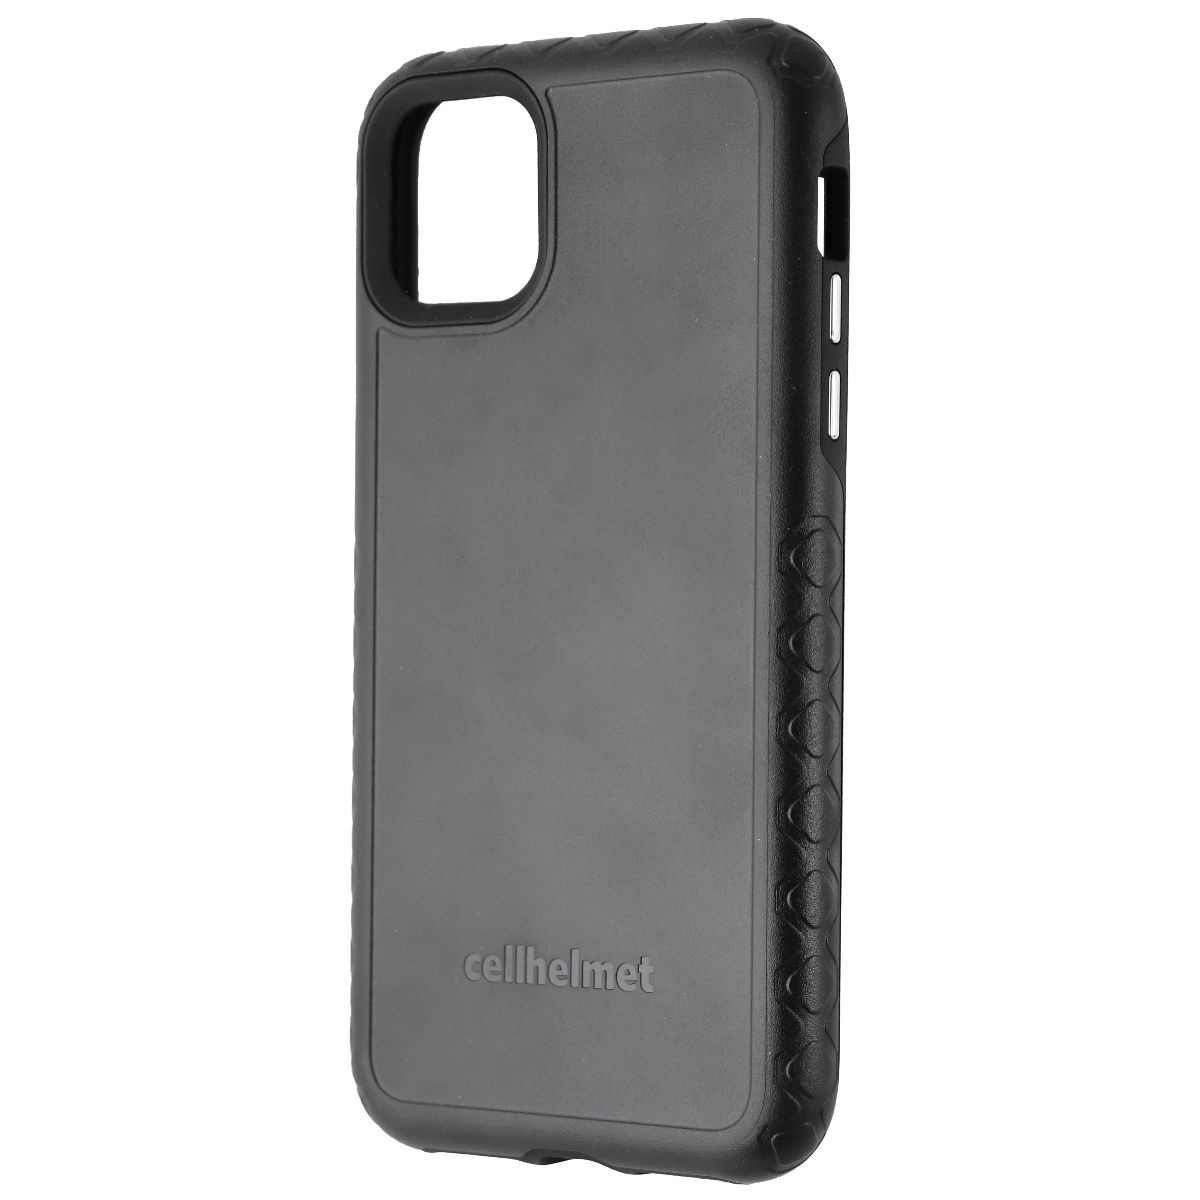 Cellhelmet Fortitude Pro Series Onyx Black Dual Layer Case For IPhone 11 Pro Max